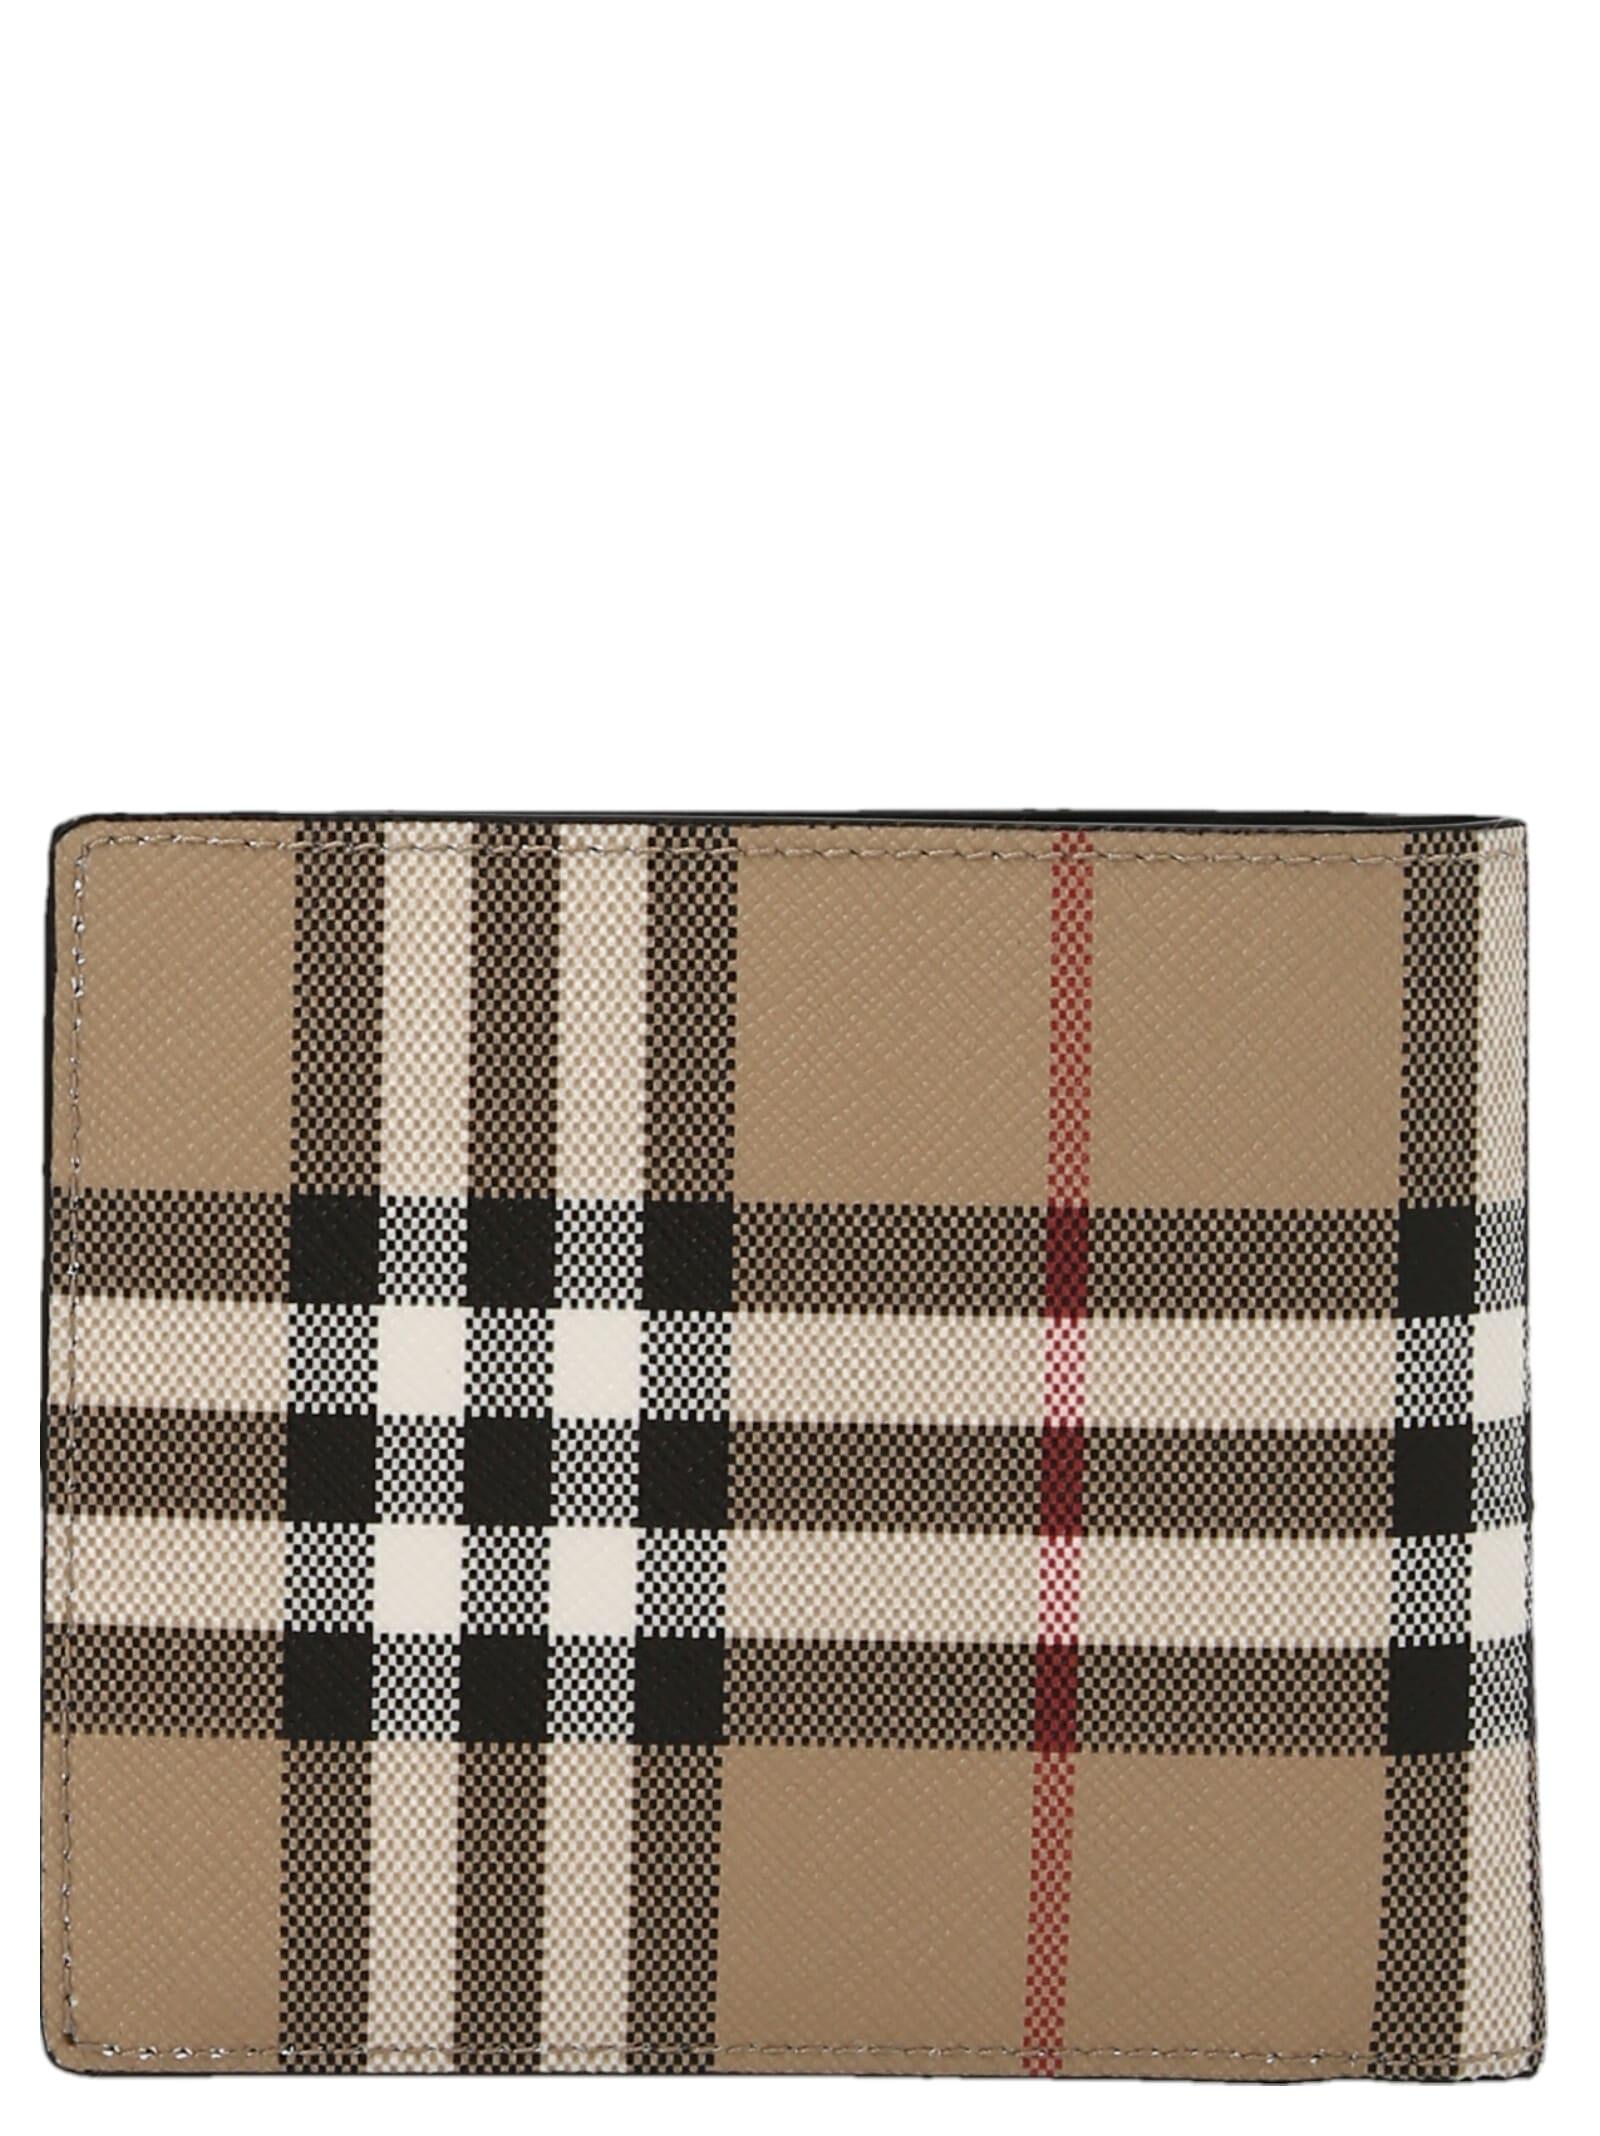 Burberry Leather Ronan Wallet in Beige (Brown) for Men - Save 47% | Lyst